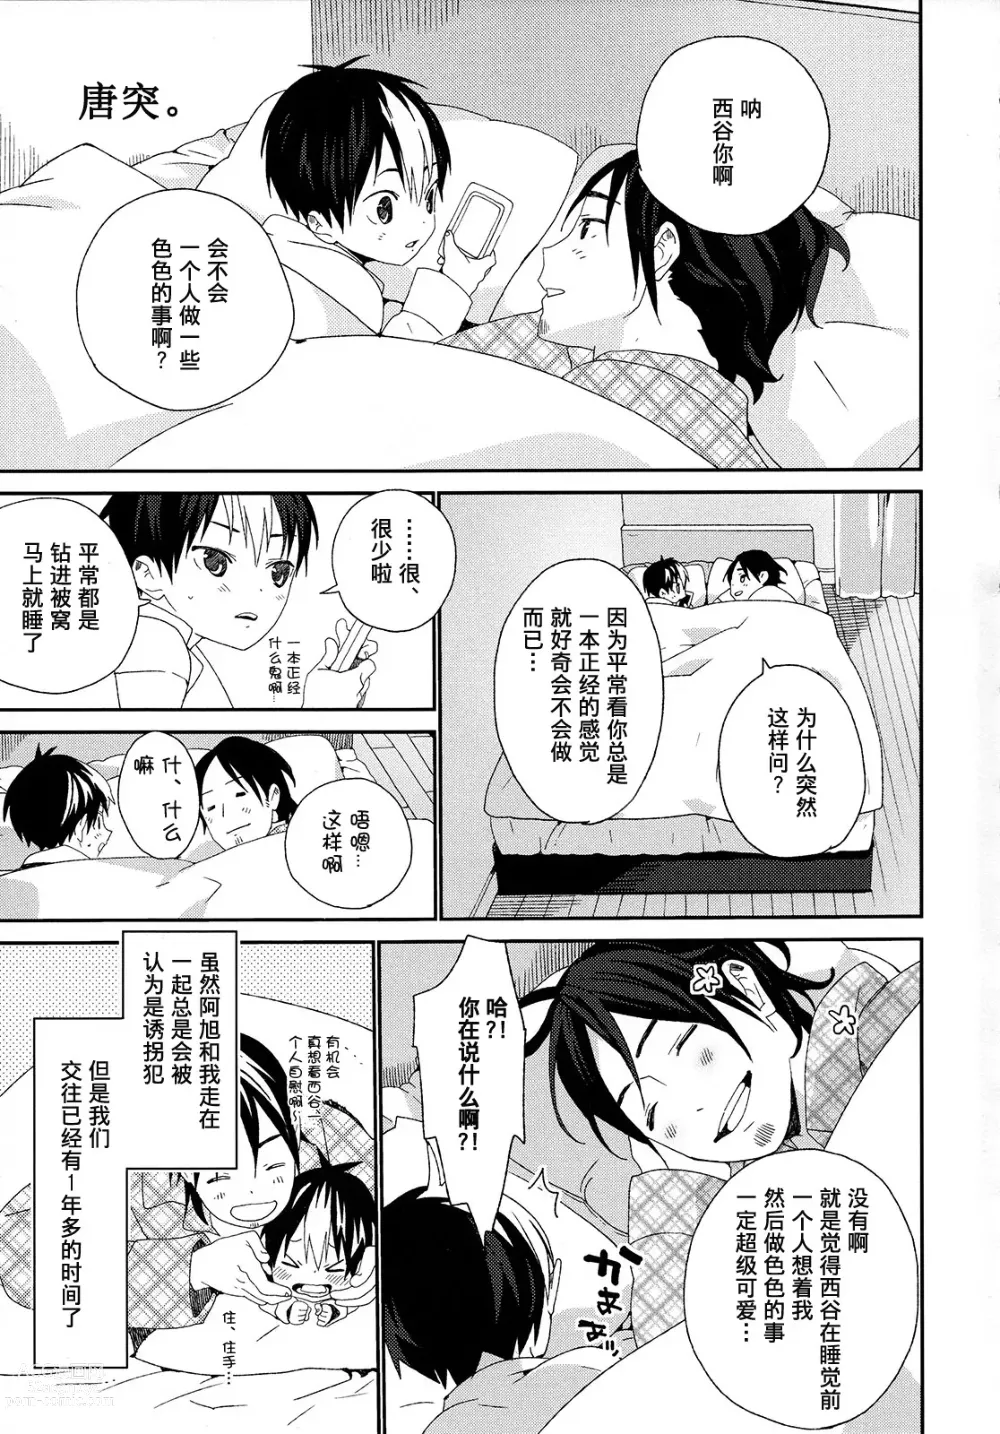 Page 5 of doujinshi 西谷君的发情期